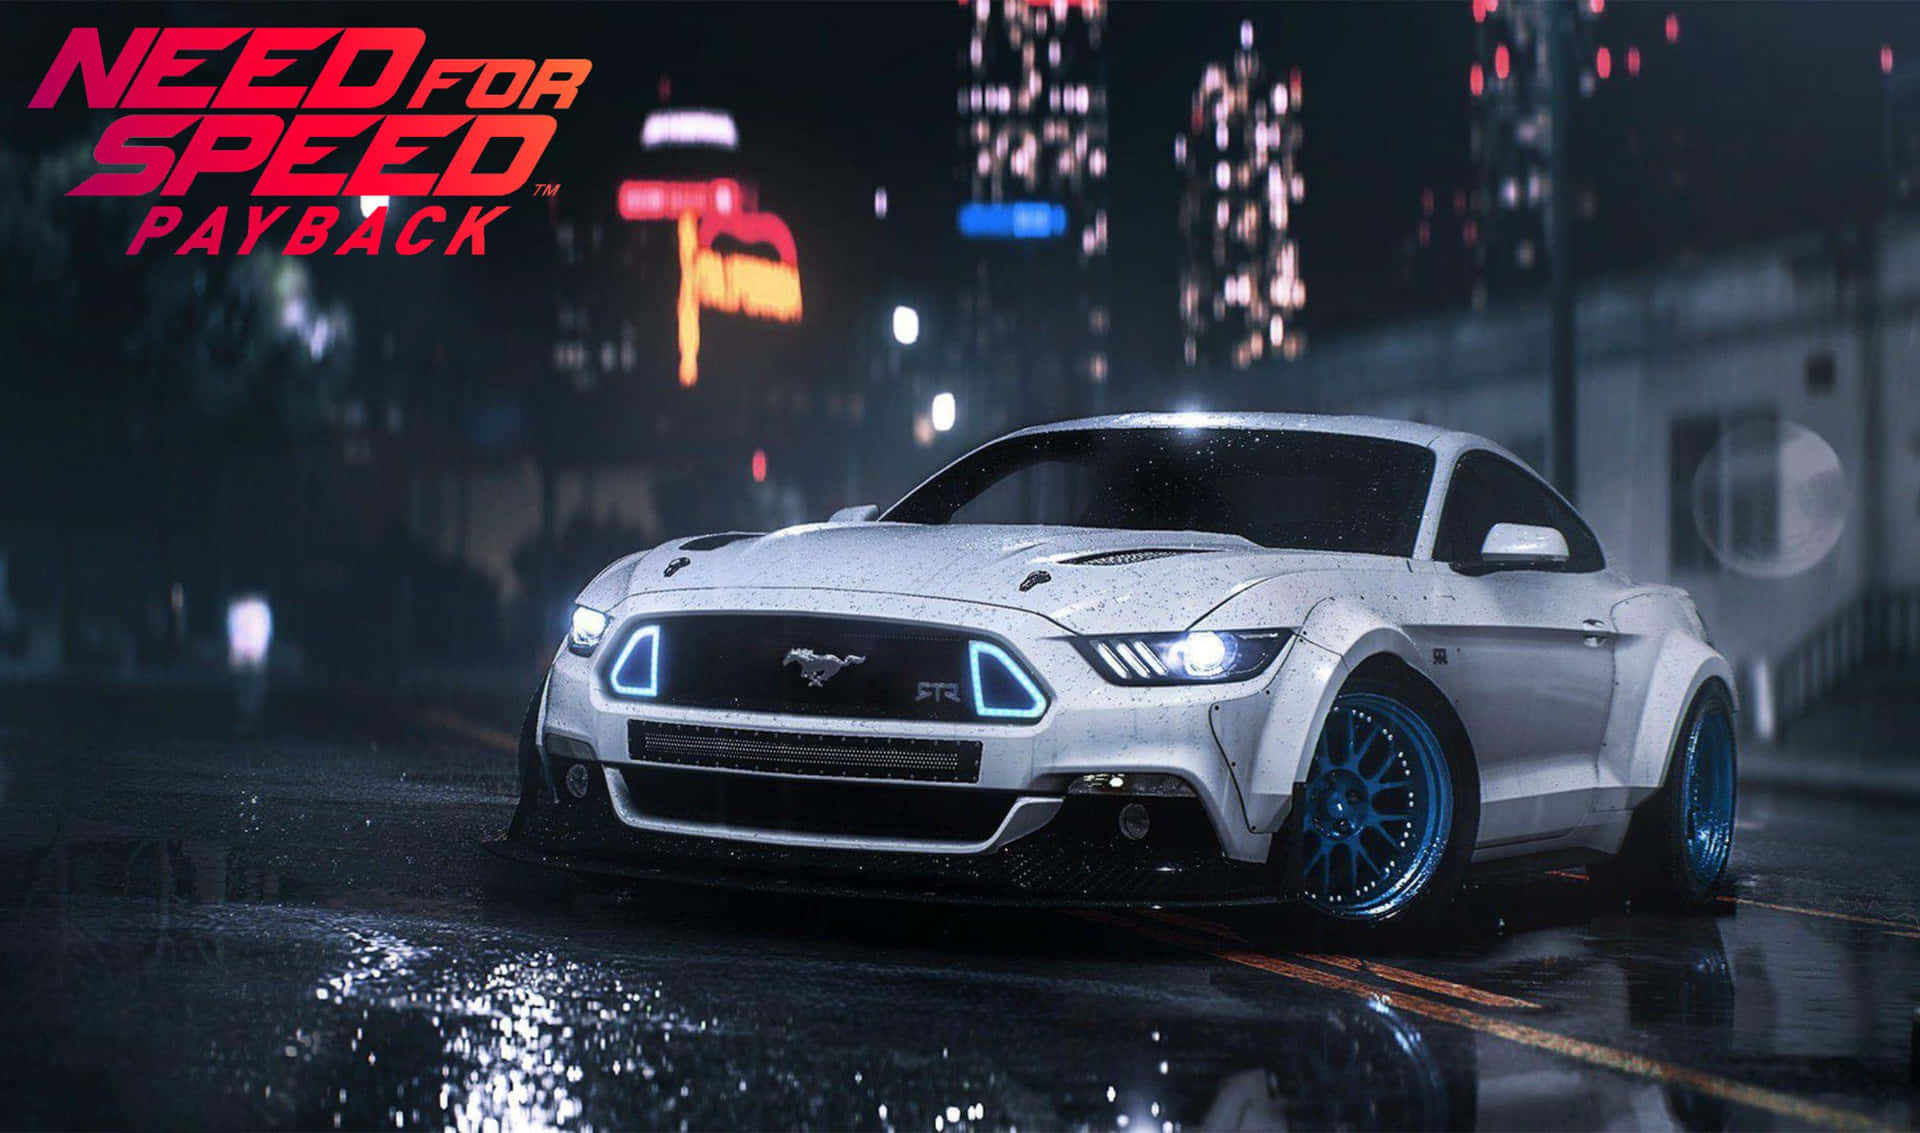 Proval'adrenalina Con Need For Speed Payback